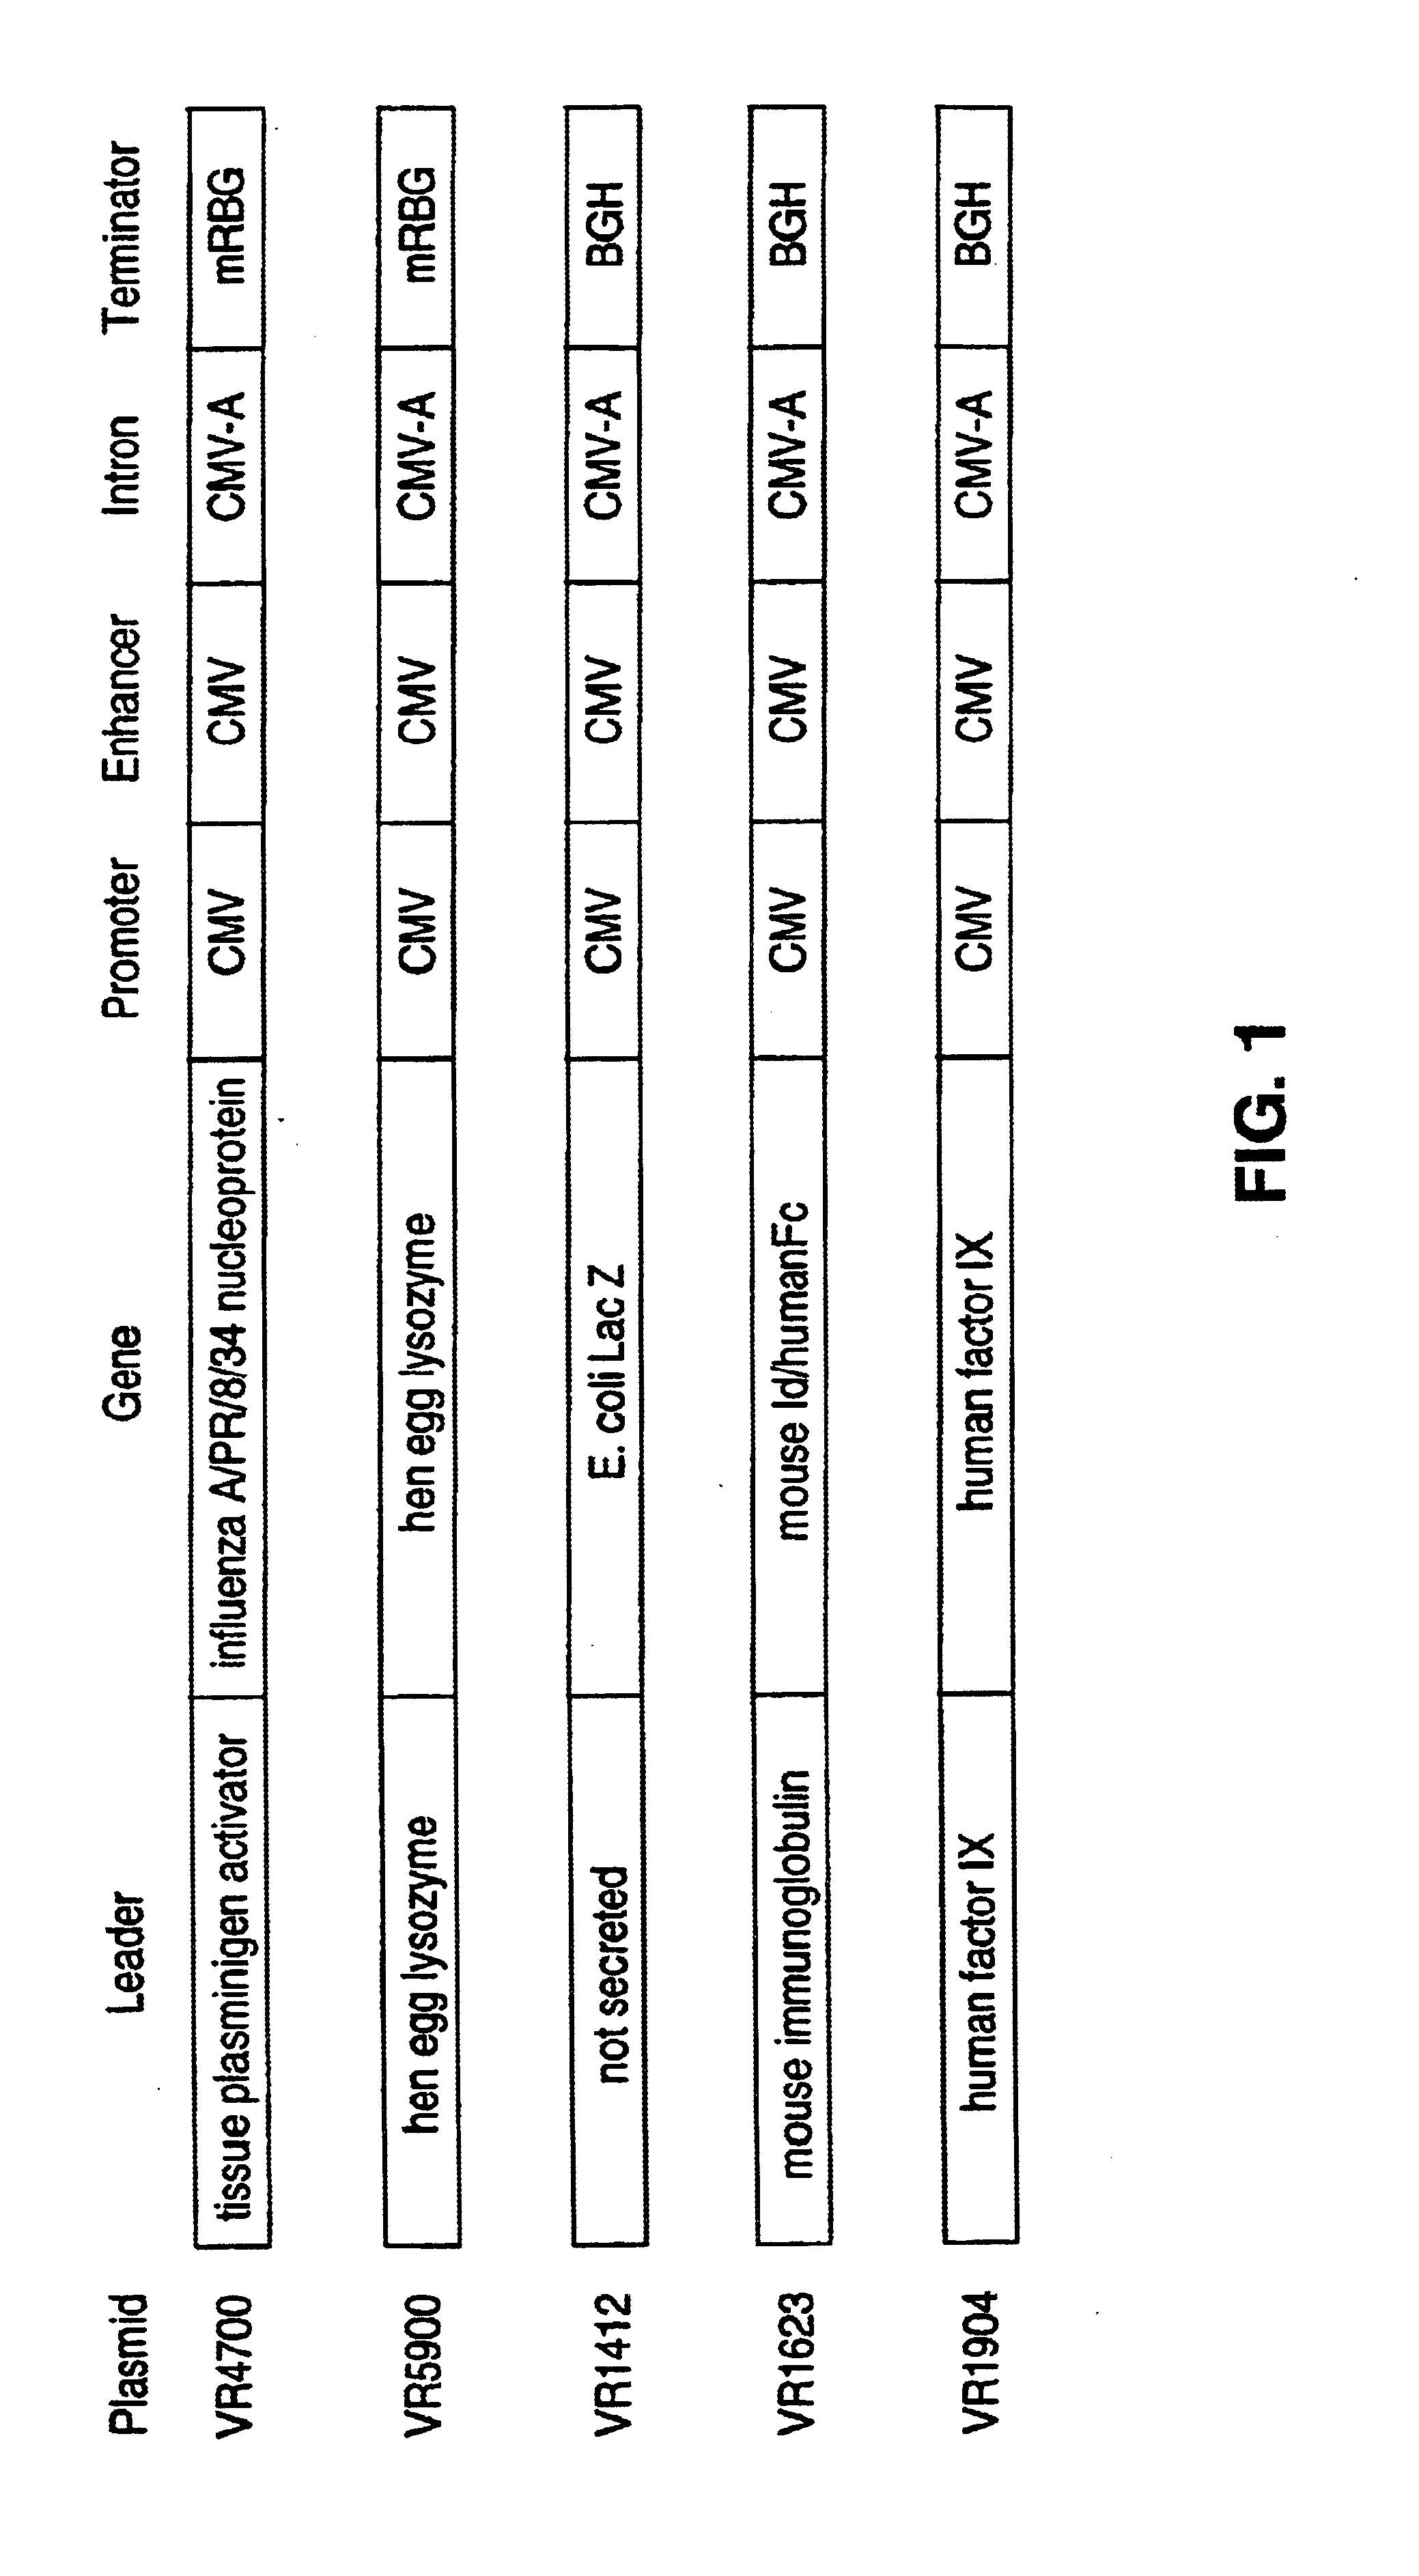 Adjuvant compositions and methods for enhancing immune responses to polynucleotide-based vaccines